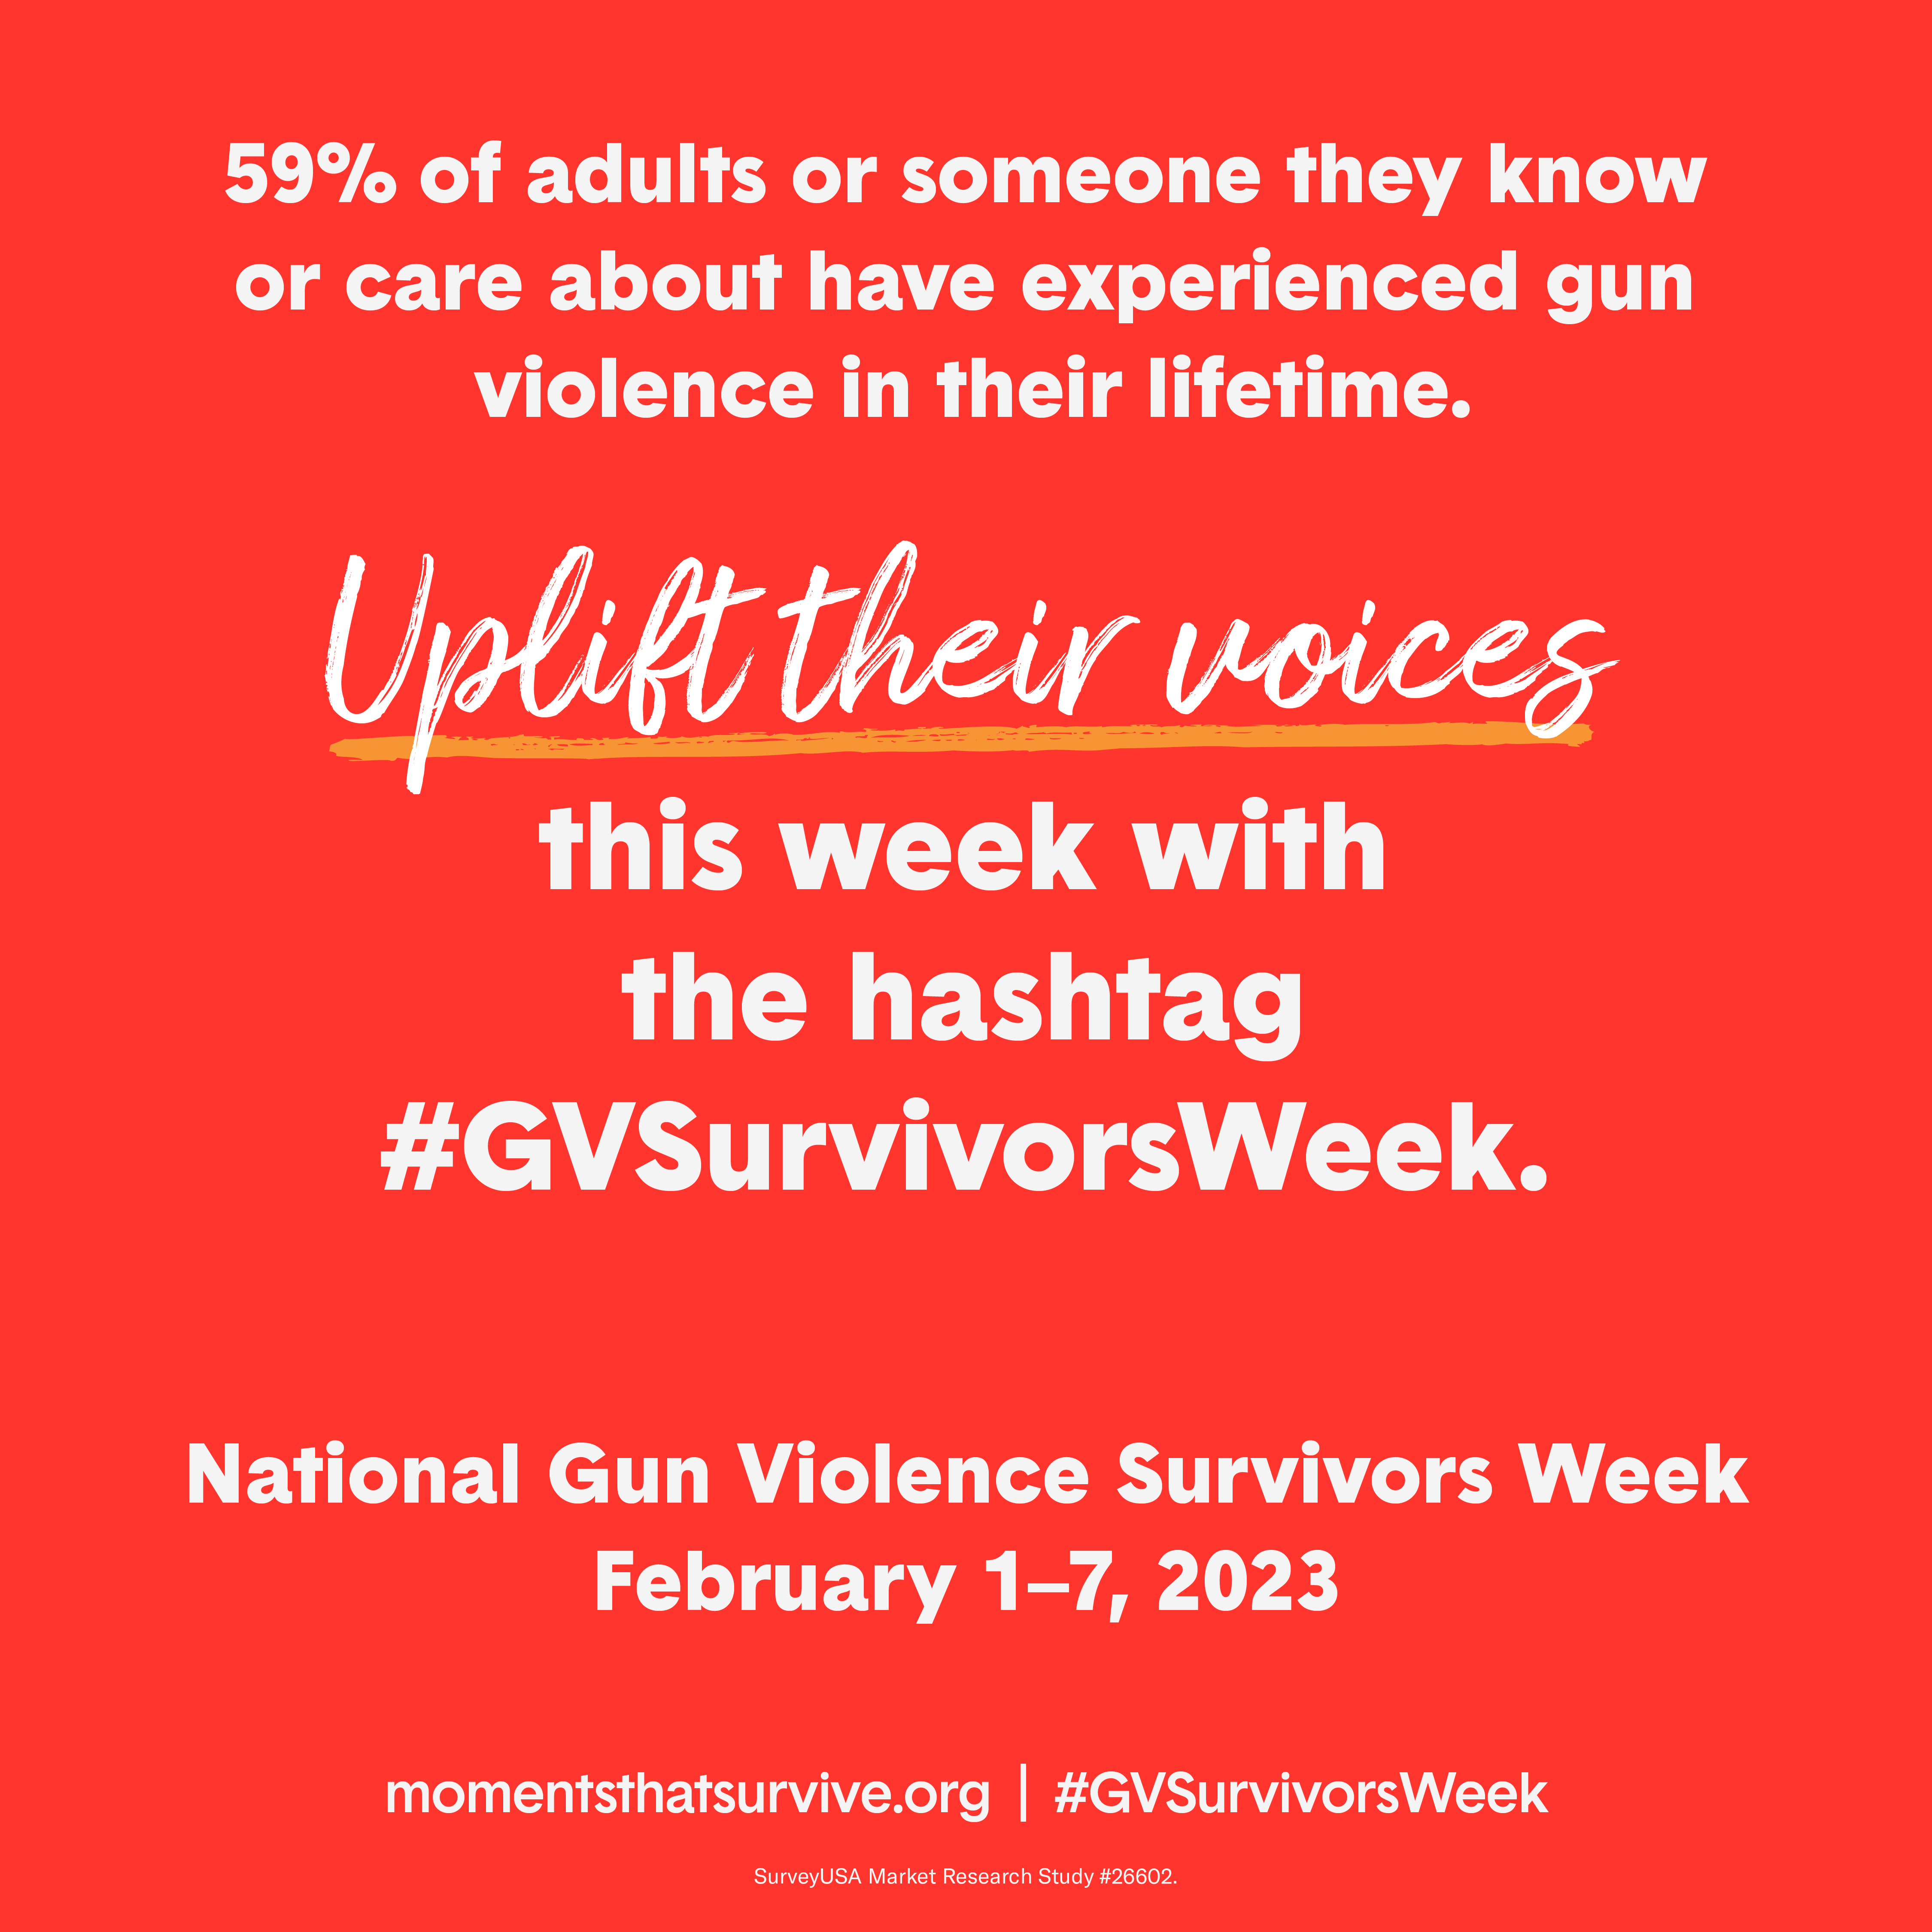 59% of adults or someone they know or care about have experienced gun violence in their lifetimes. Uplift their voices this week with the hashtag #GVSurvivorsWeek. National Gun Violence Survivors Week, February 1-7, 2023